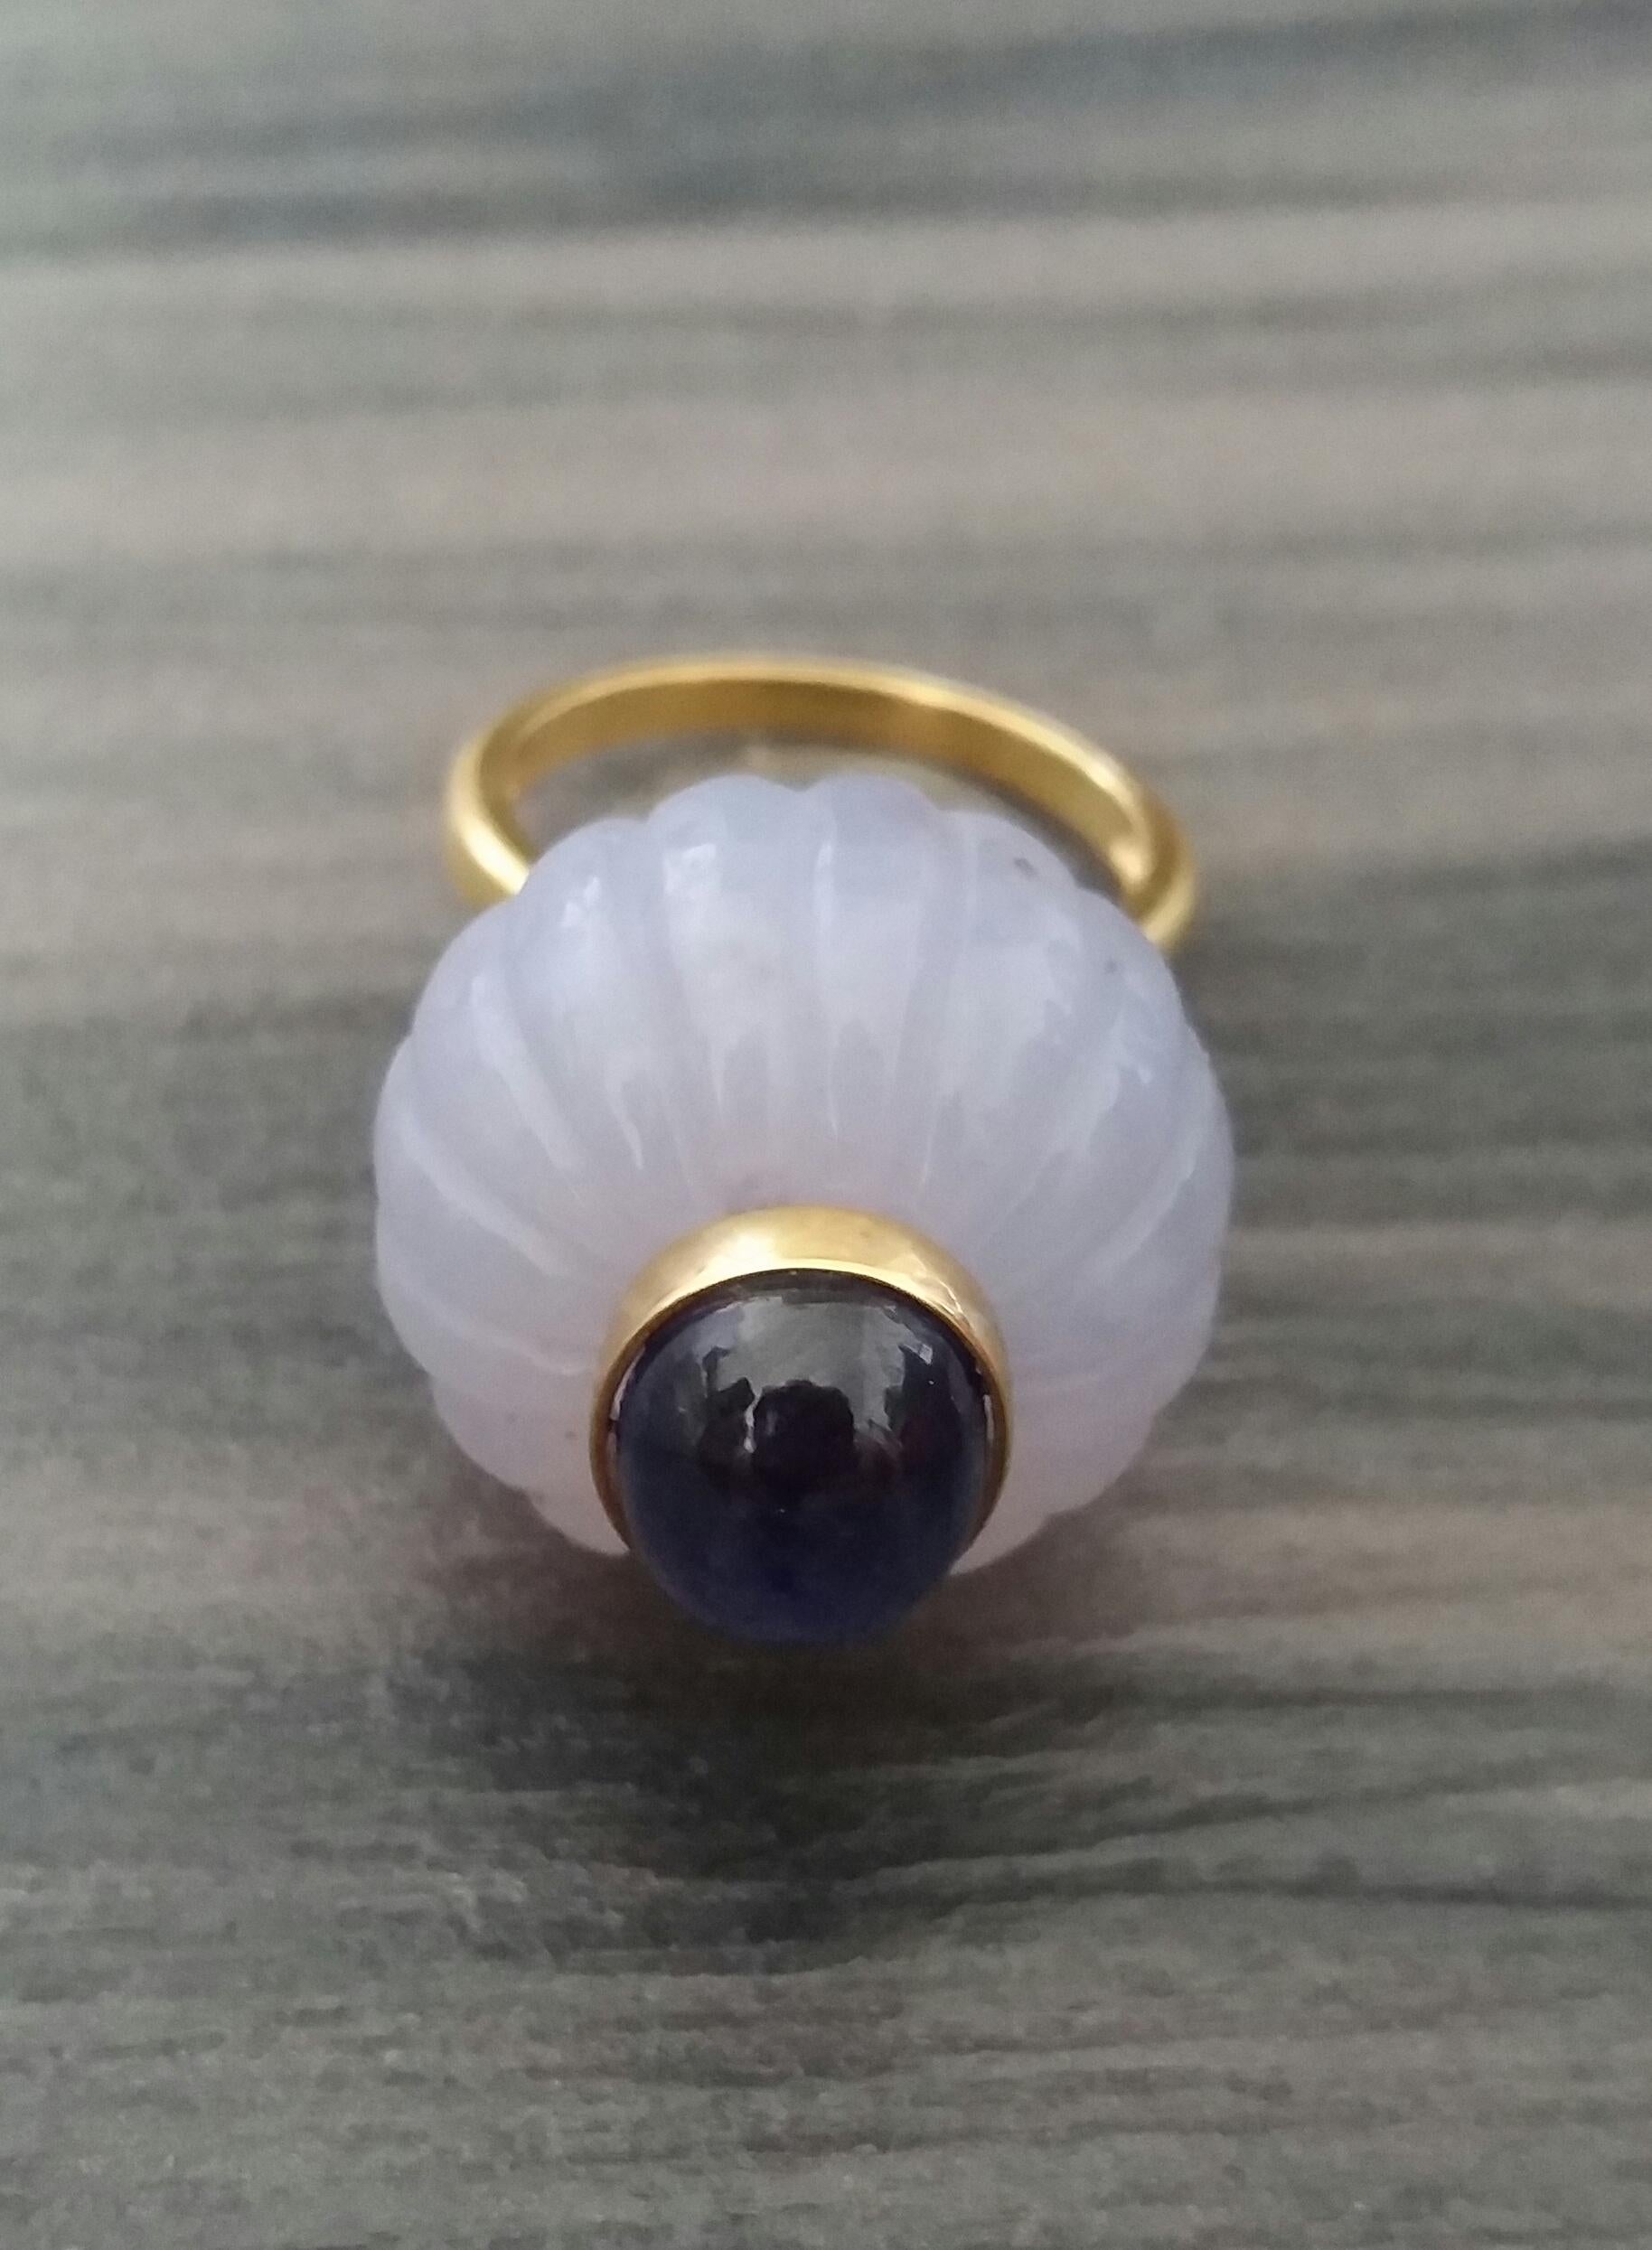 
Melon cut Chalcedony Round Bead of 20 mm. in diameter and 16 mm. thick with in the center an Oval Blue Sapphire cabochon measuring  8x9 mm. set in 14 kt  Yellow Gold is mounted on top of a 14 Kt. white gold  ring ( actual size #7, but can resize